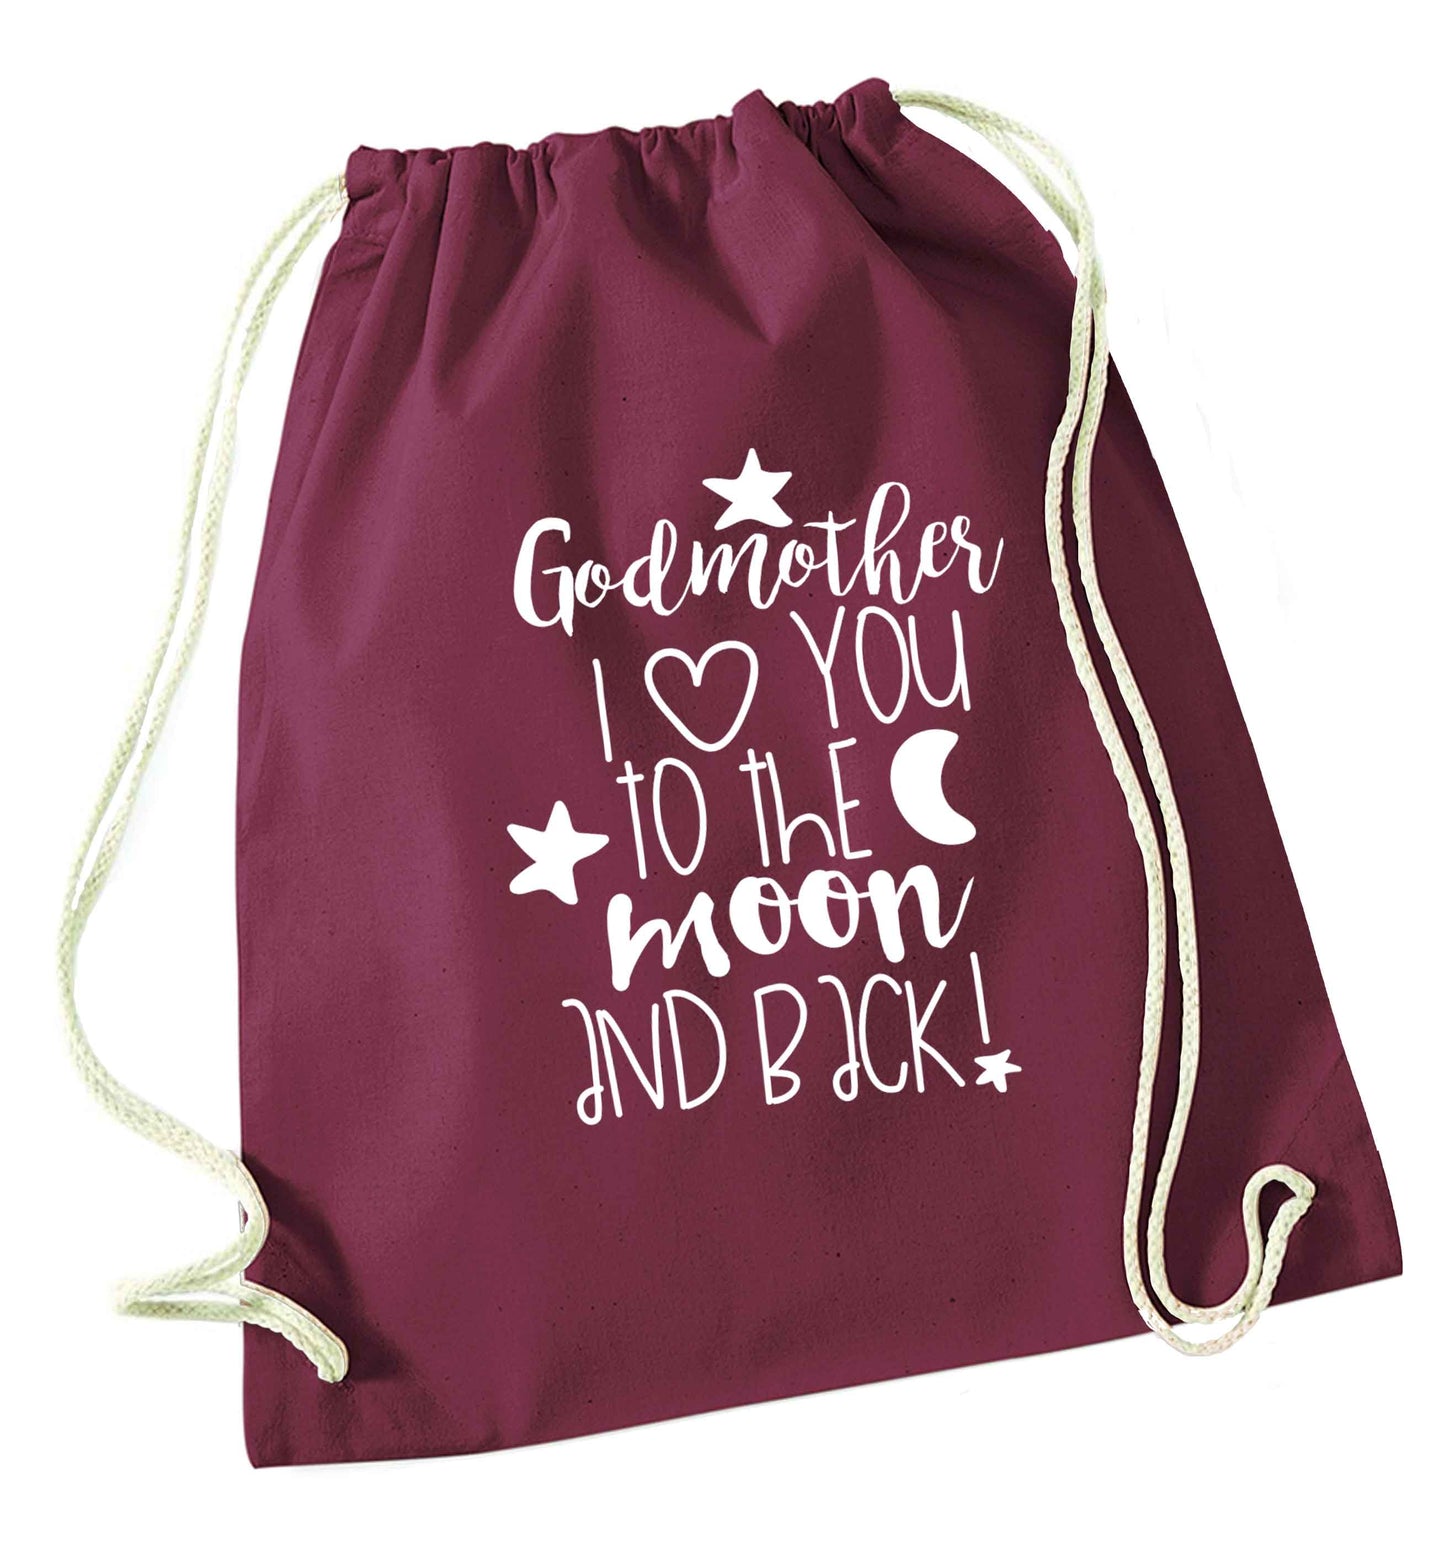 Godmother I love you to the moon and back maroon drawstring bag